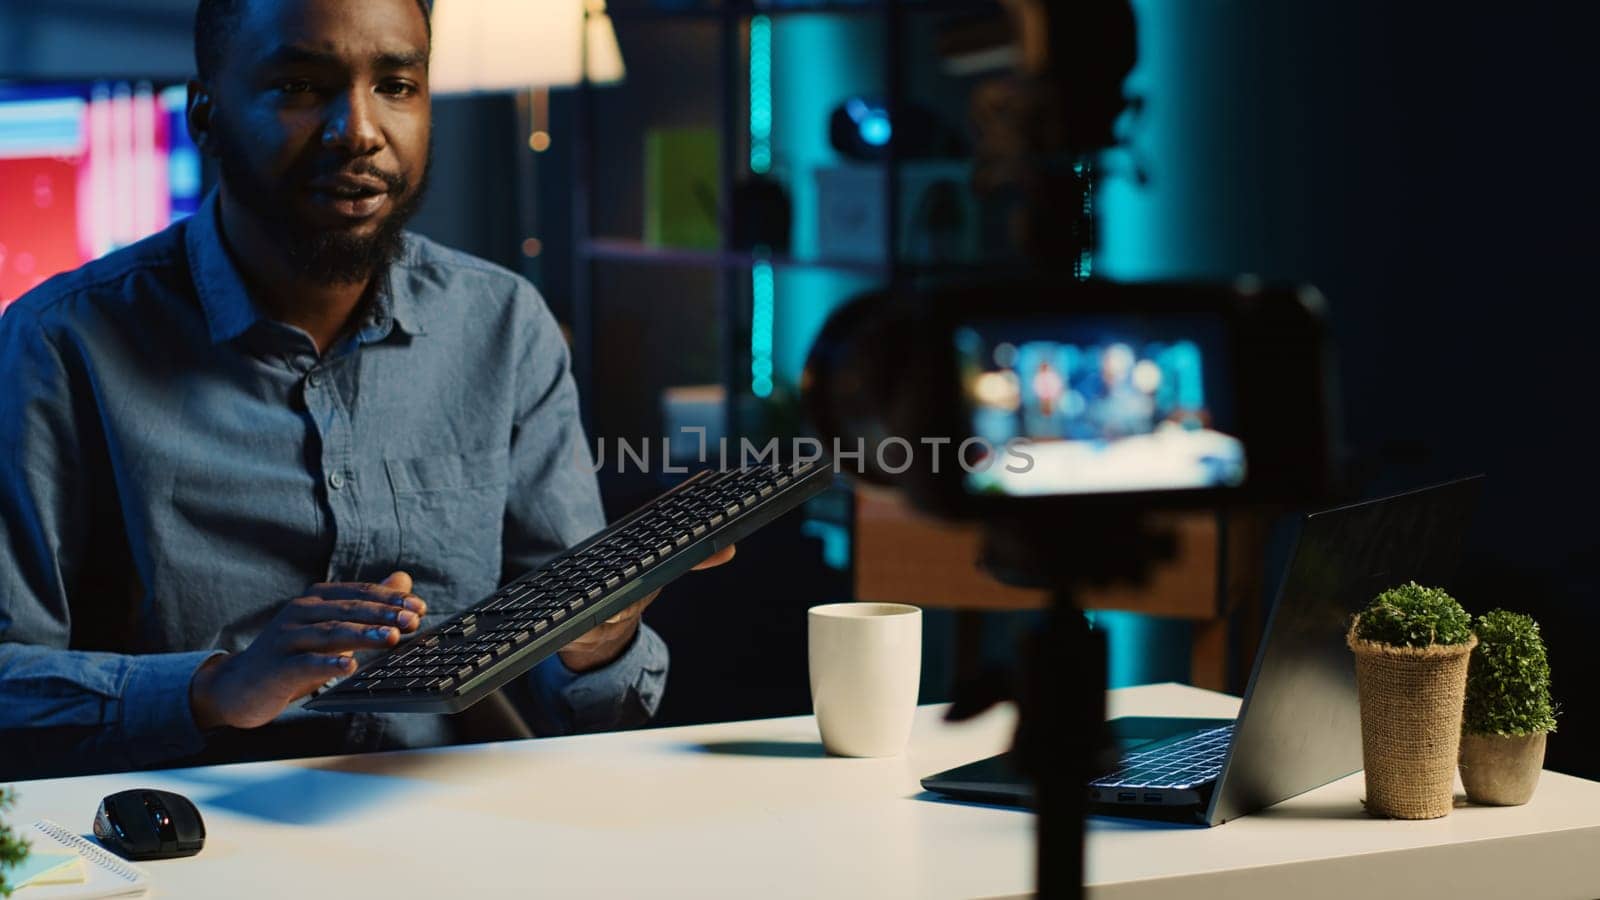 Content creator in living room studio films mechanical keyboard review for online streaming platforms. Trending media star hosts technology focused internet show, unboxing computer peripherals